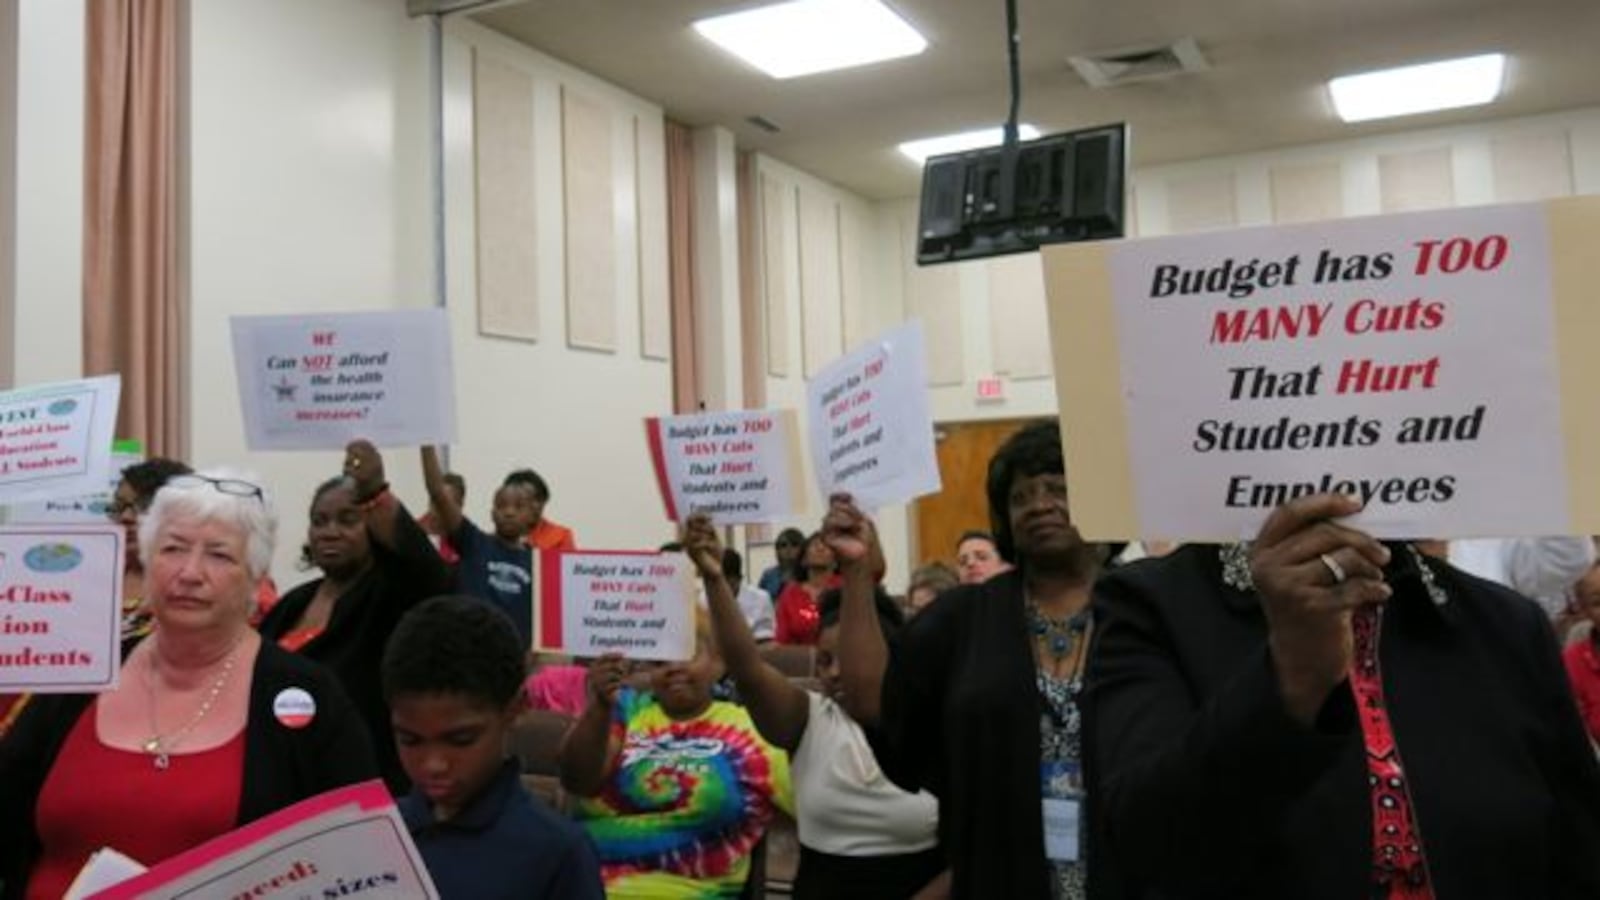 Several Shelby County School teachers protested budget cuts during Tuesday's called meeting to approve the 2014-15 budget.